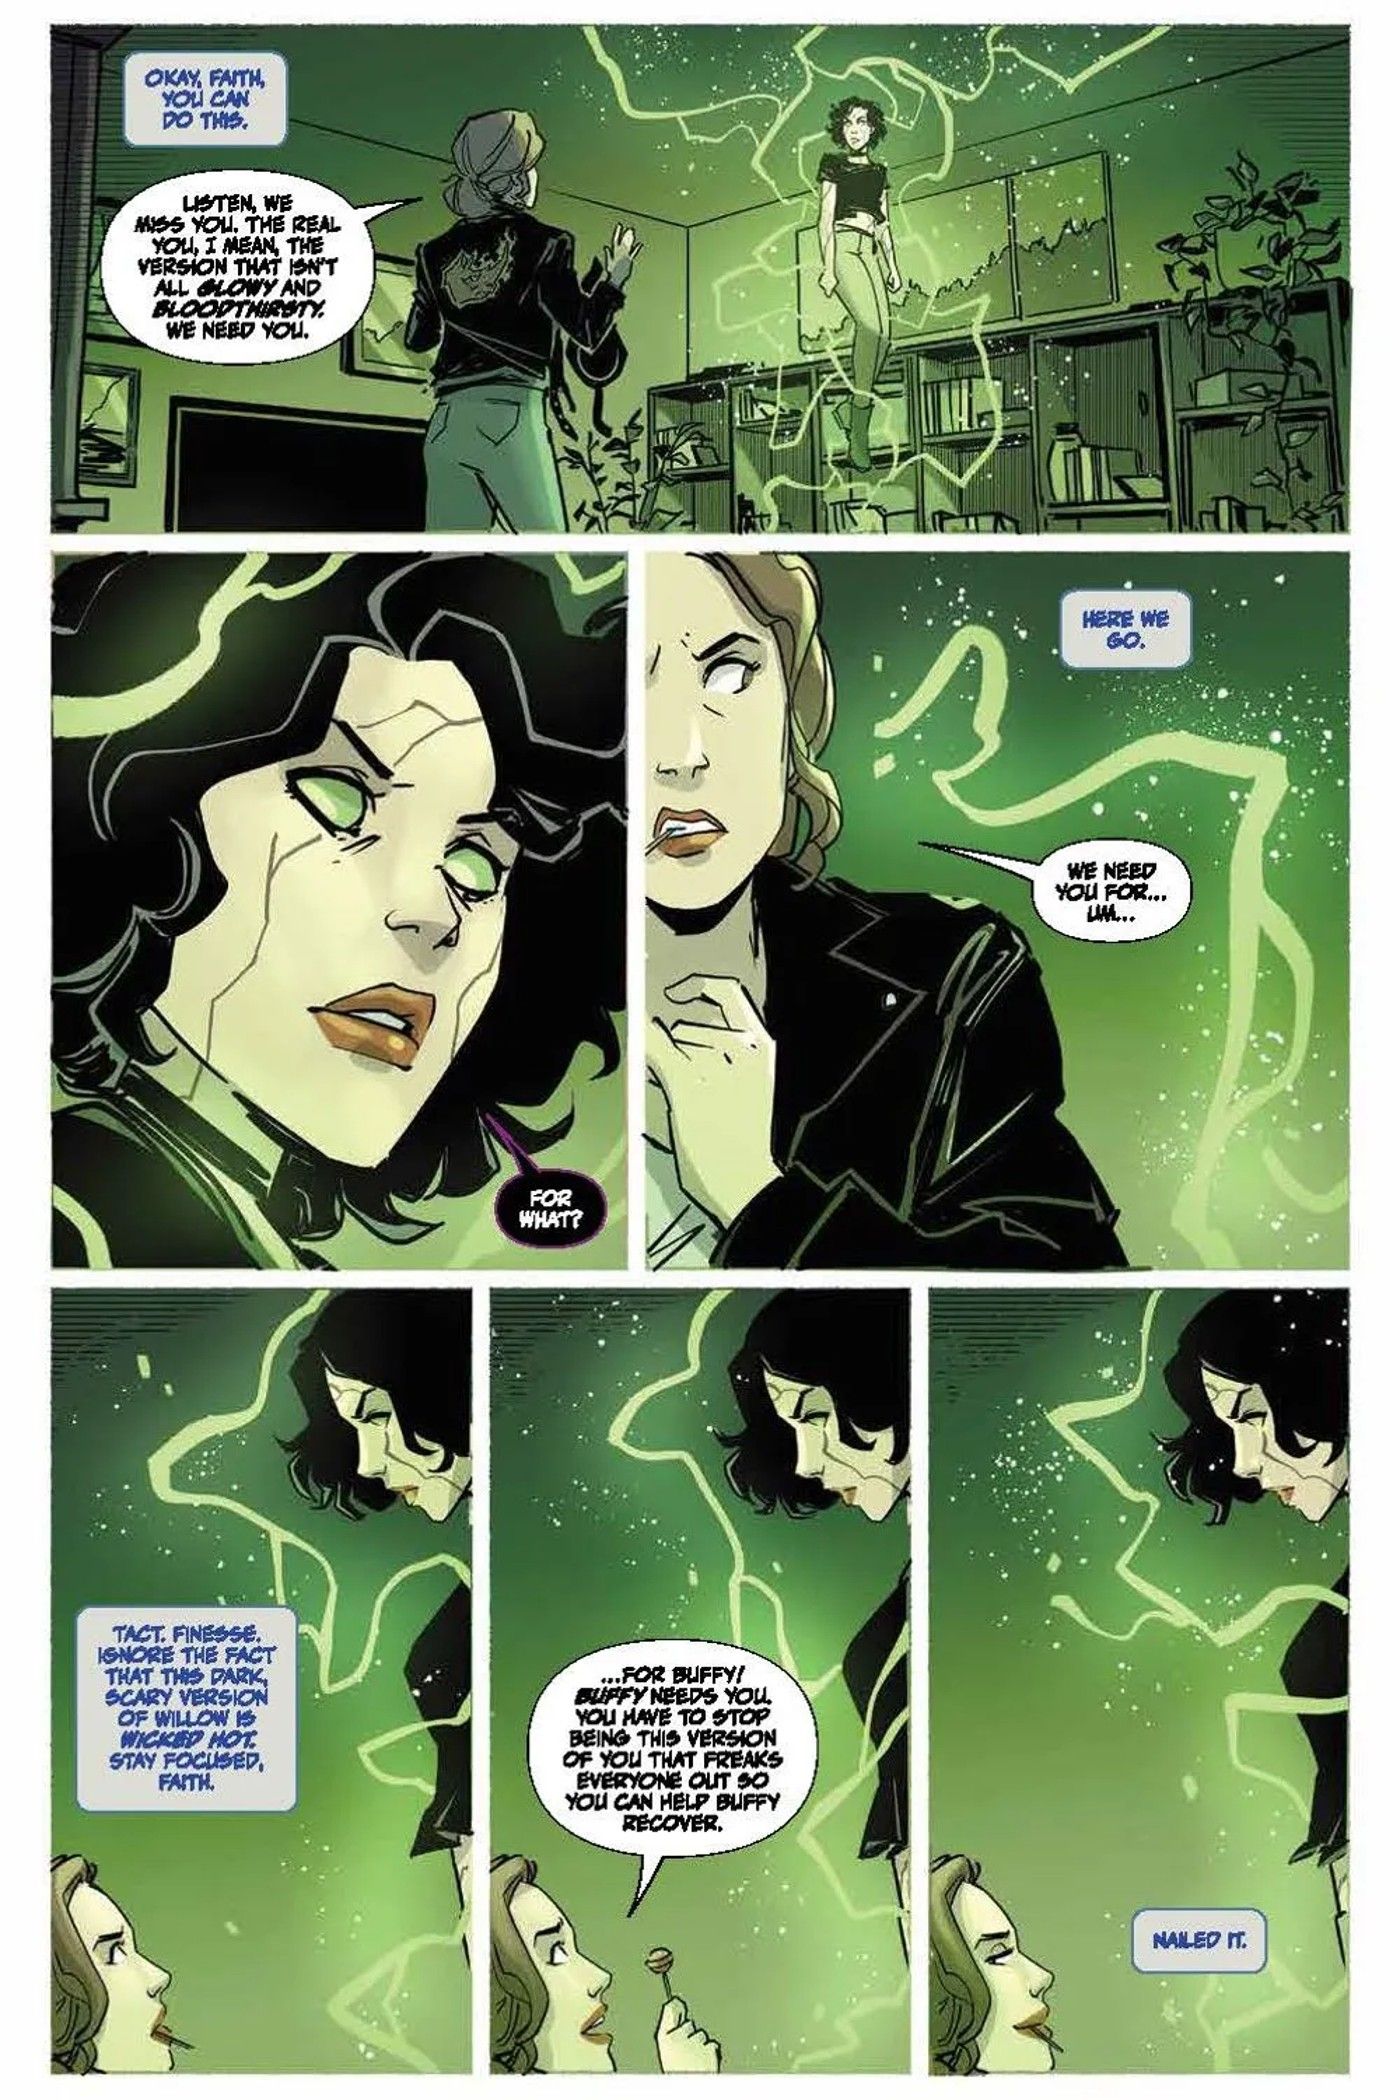 Faith confronts Dark Willow in Buffy the Vampire Slayer comic